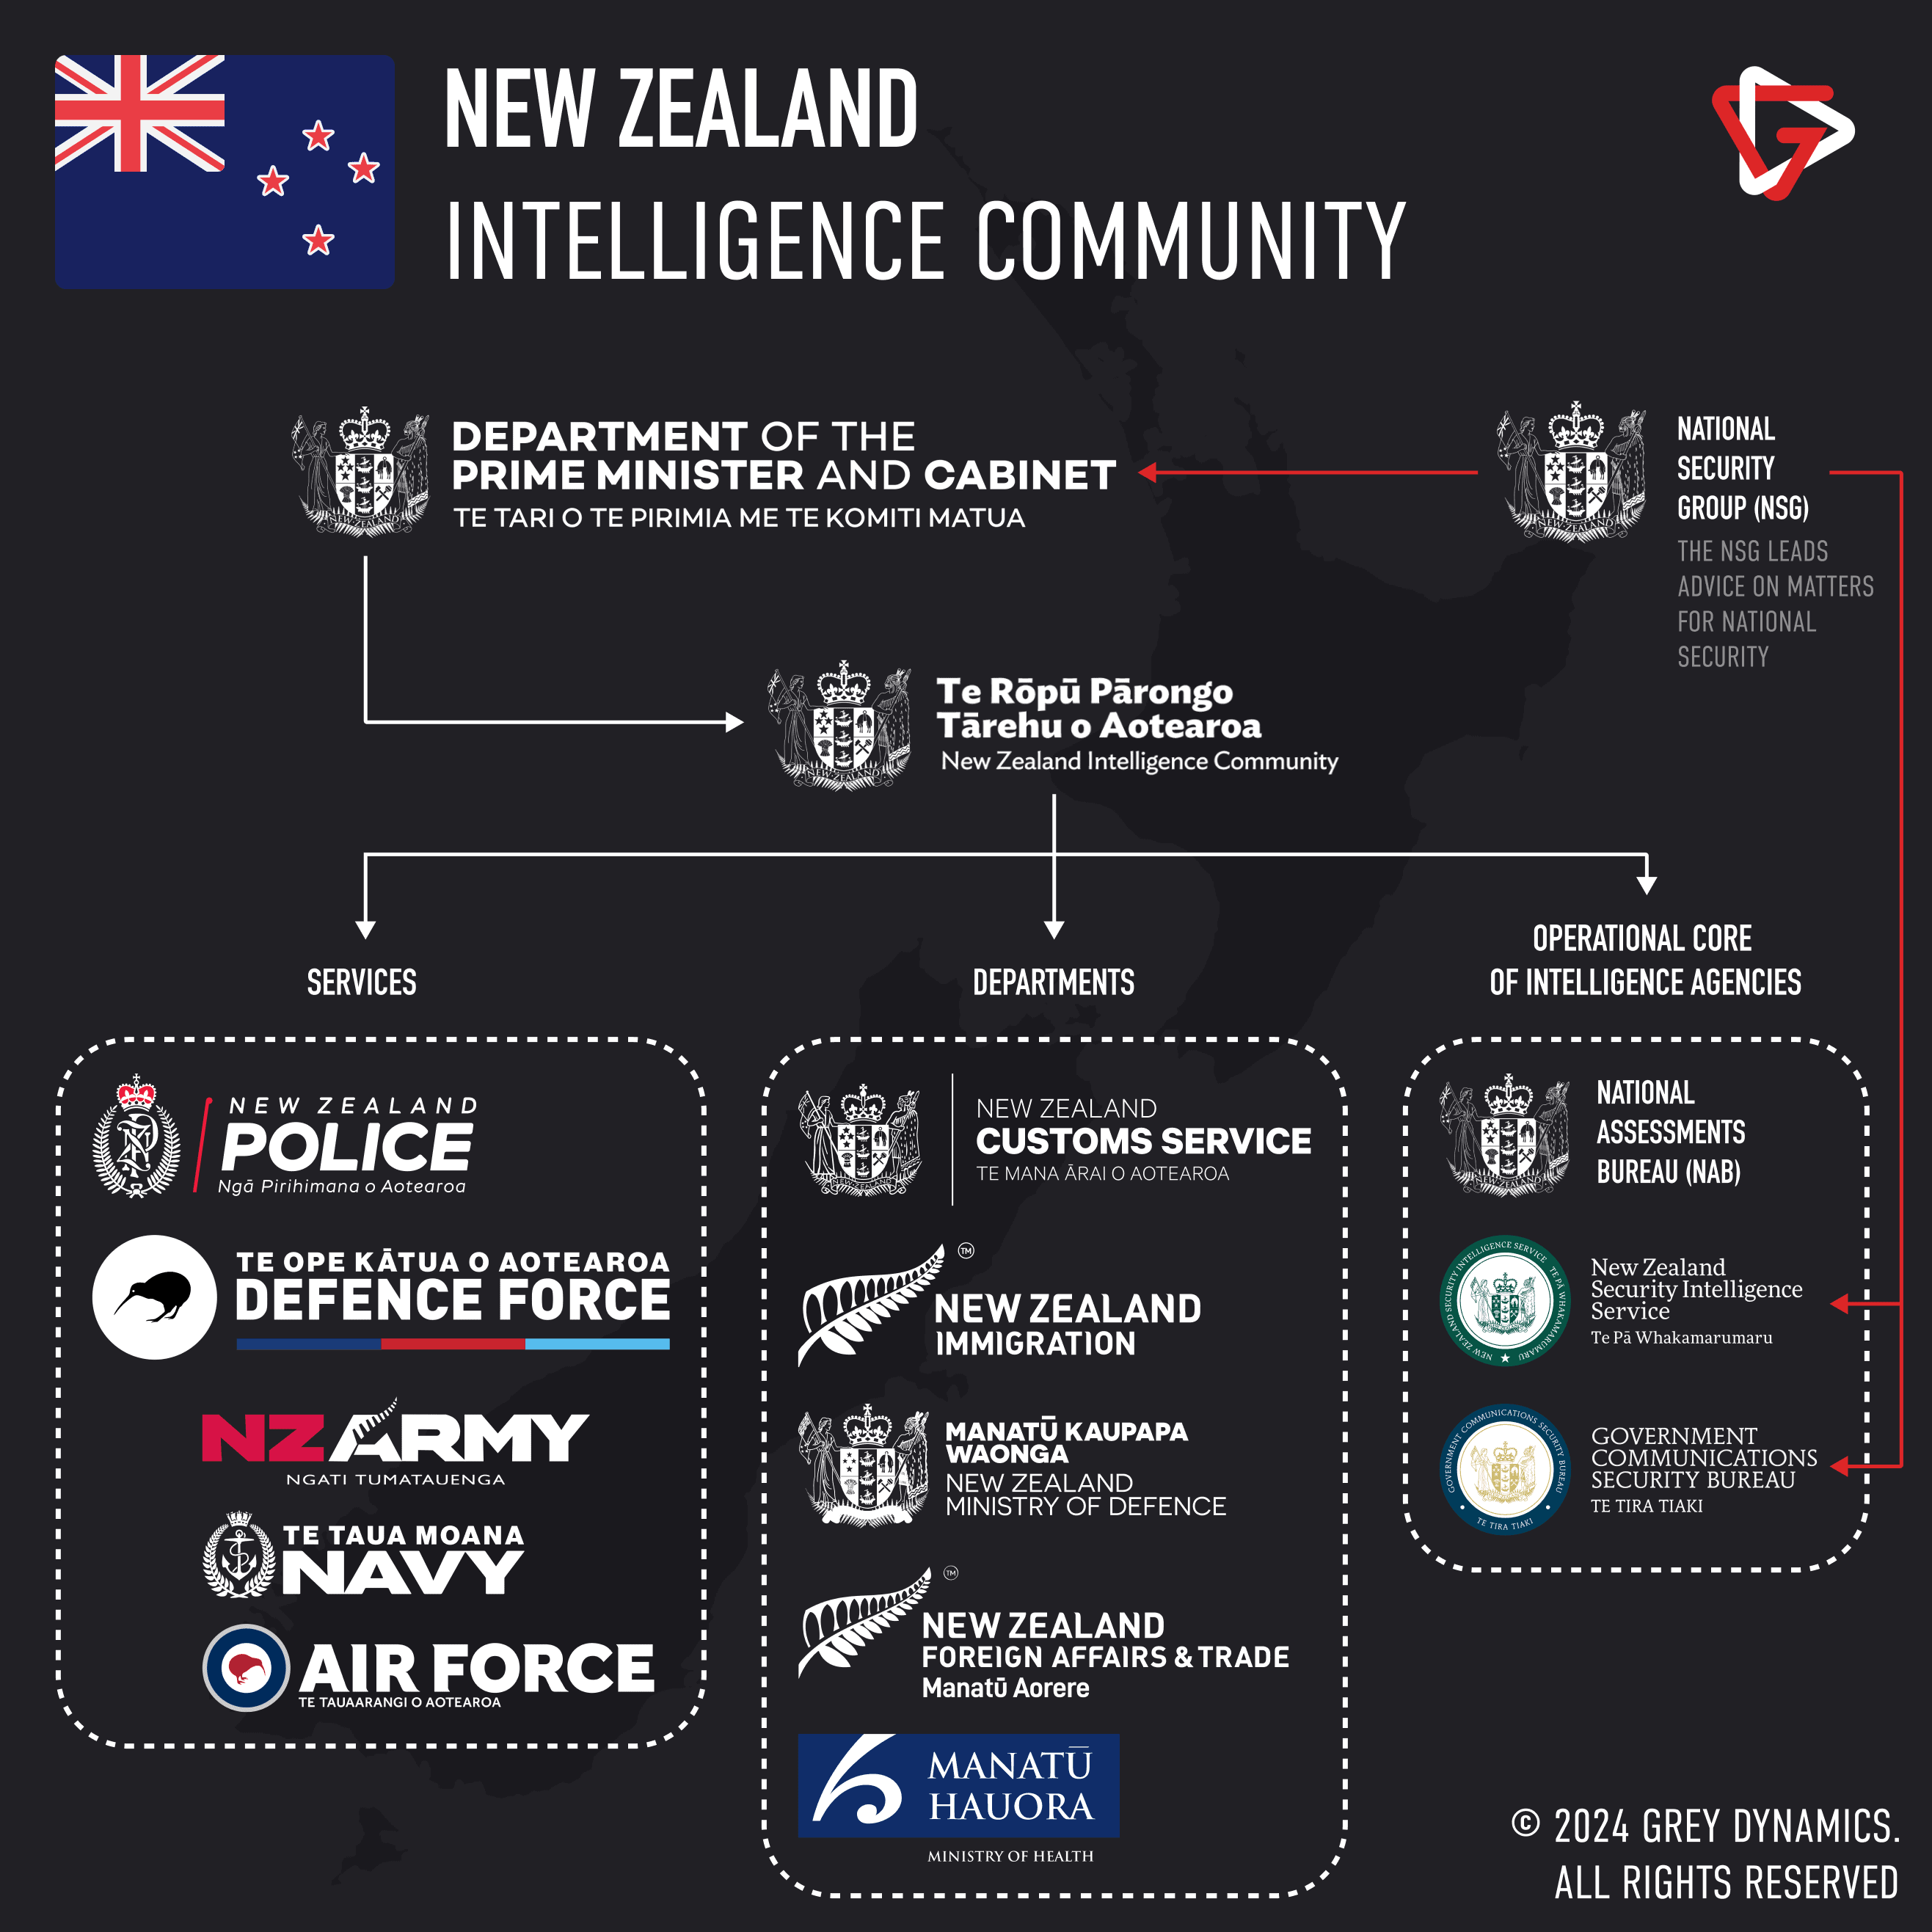 The Structure of New Zealand Intelligence Community (NZIC). Graphic By: Grey Dynamics